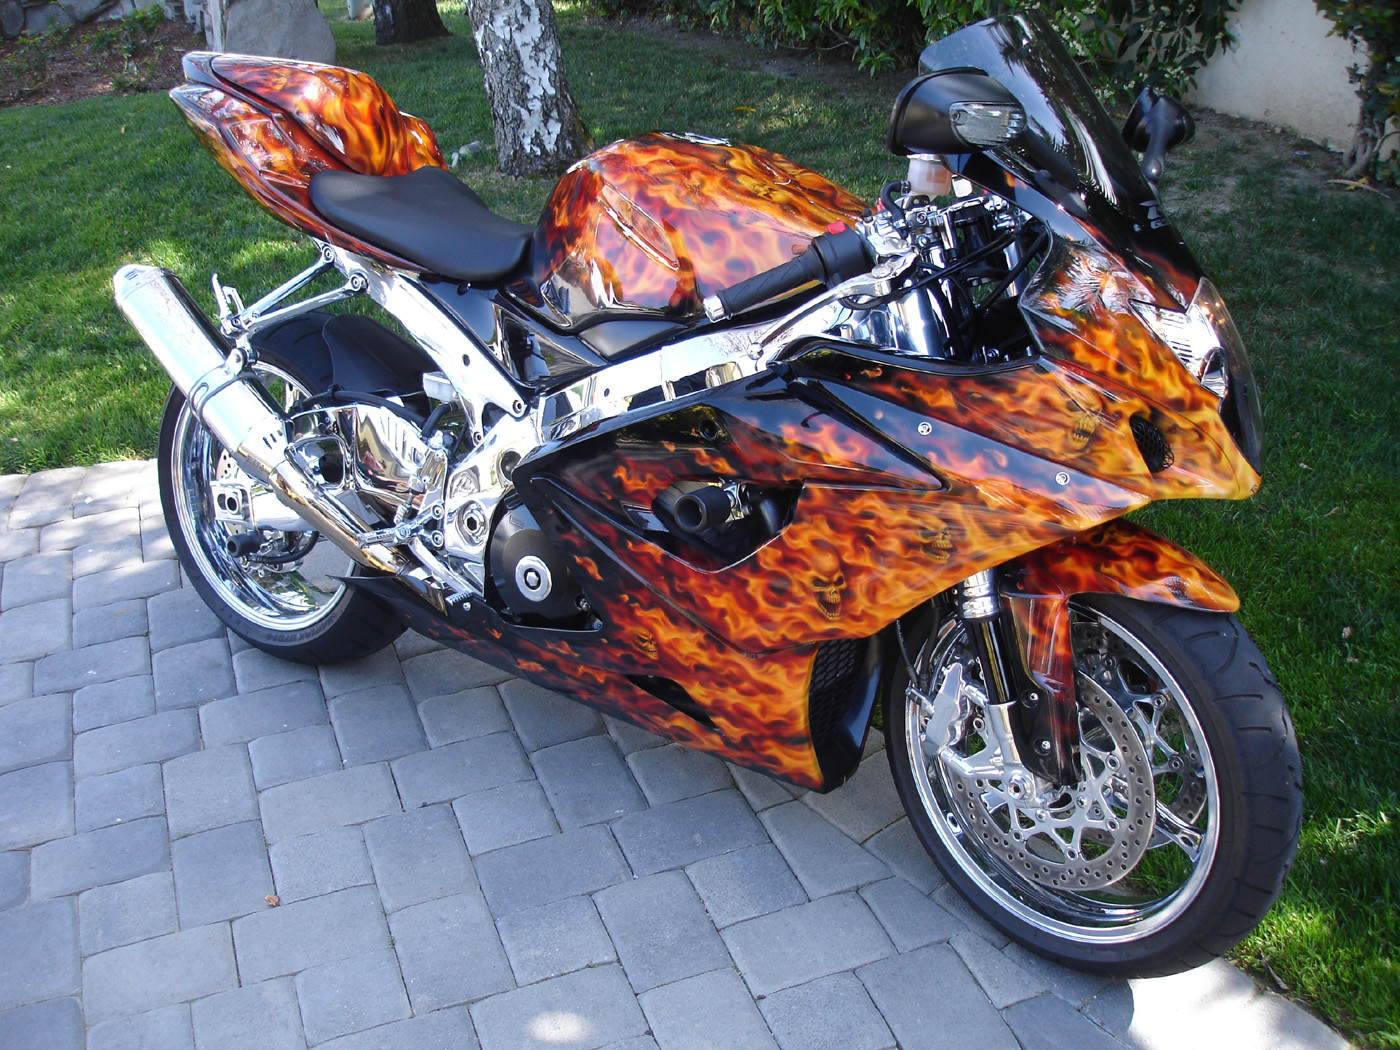 Custom Motorcycles For Sale, Custom Choppers For Sale, Custom Cycles